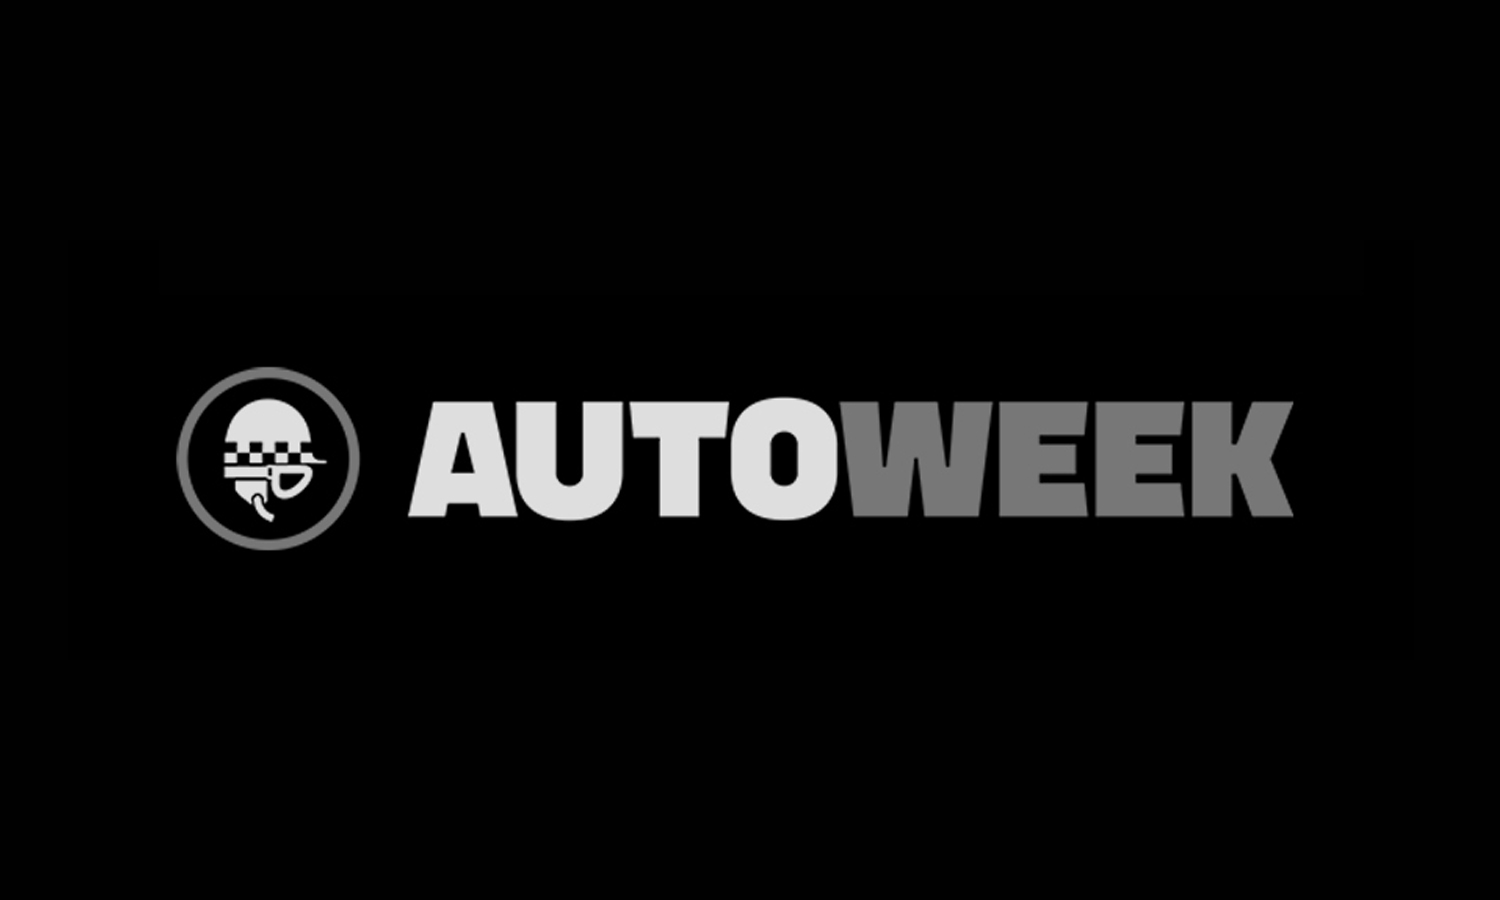 The autoweek logo in black and white